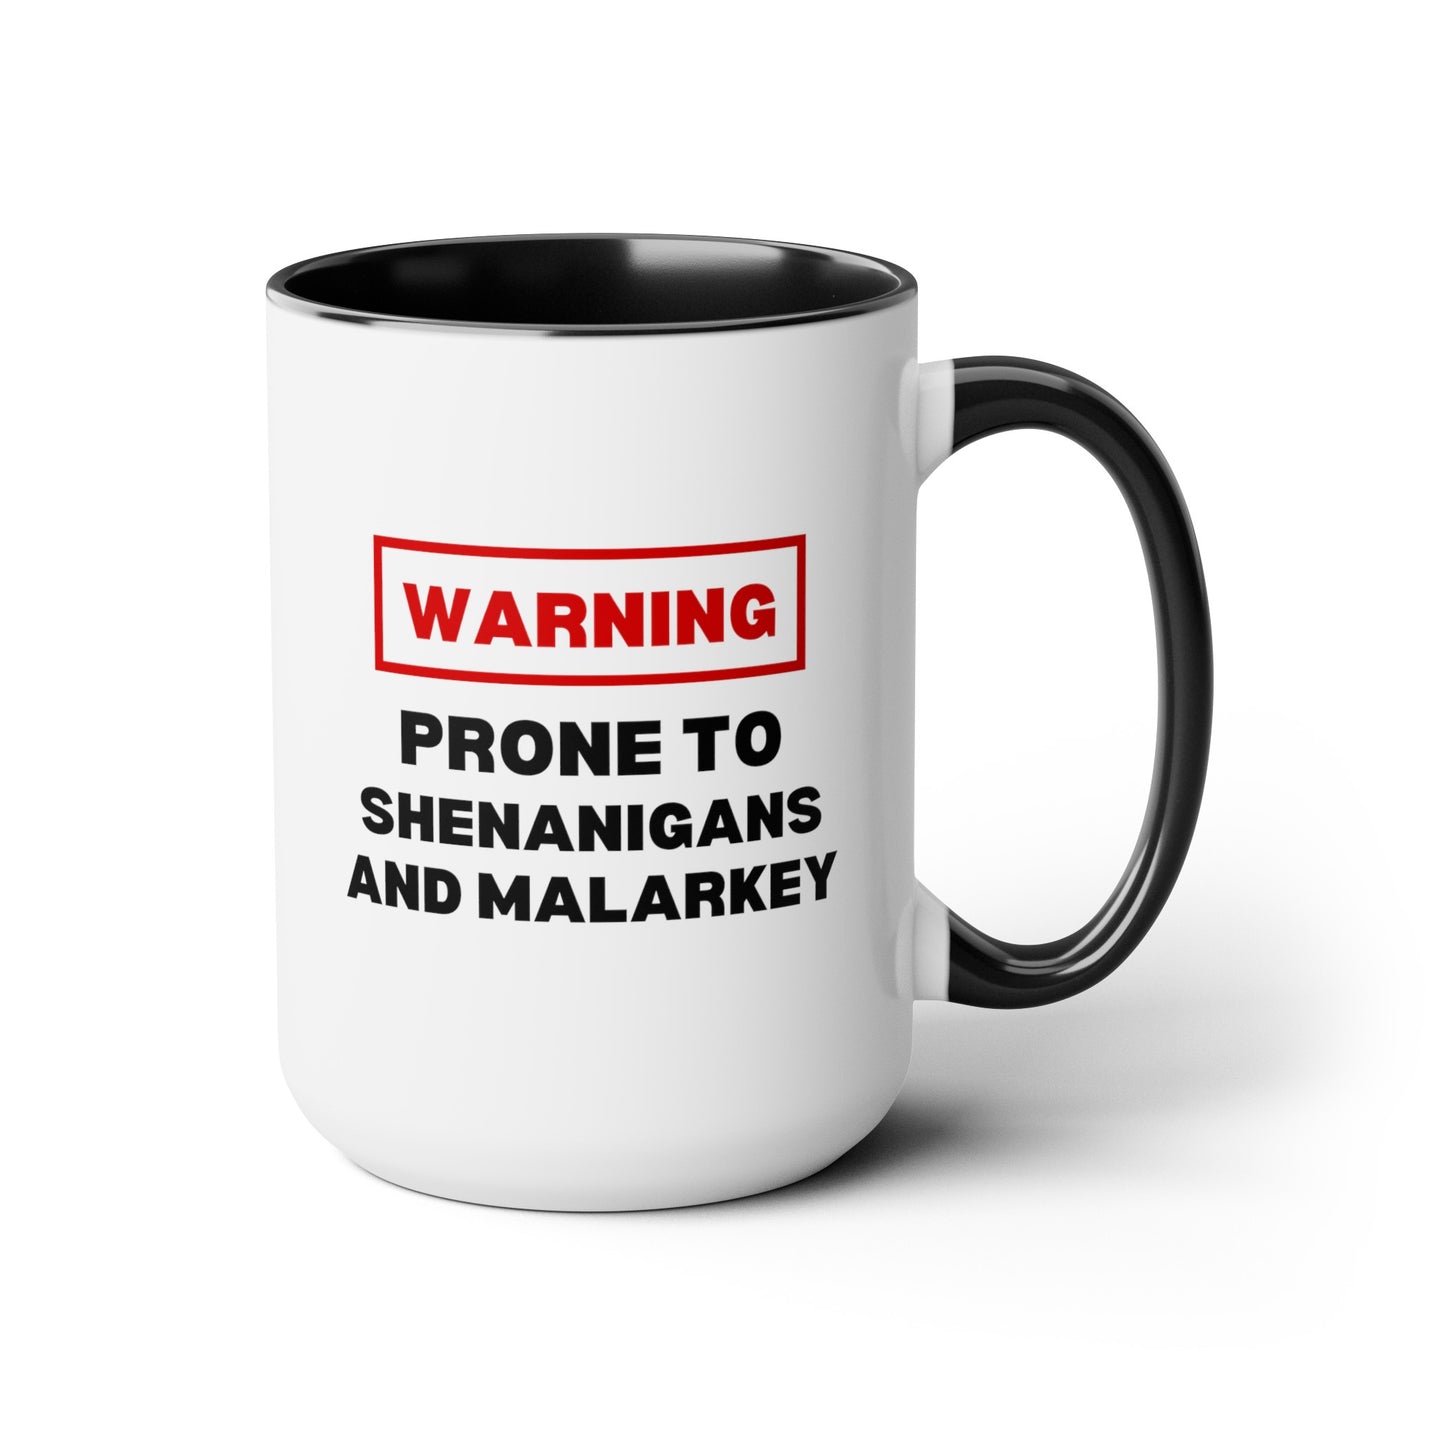 Warning Prone To Shenanigans And Malarkey 15oz white with black accent funny large coffee mug gift for st pattys patricks day her wife girlfriend aunt daughter waveywares wavey wares wavywares wavy wares